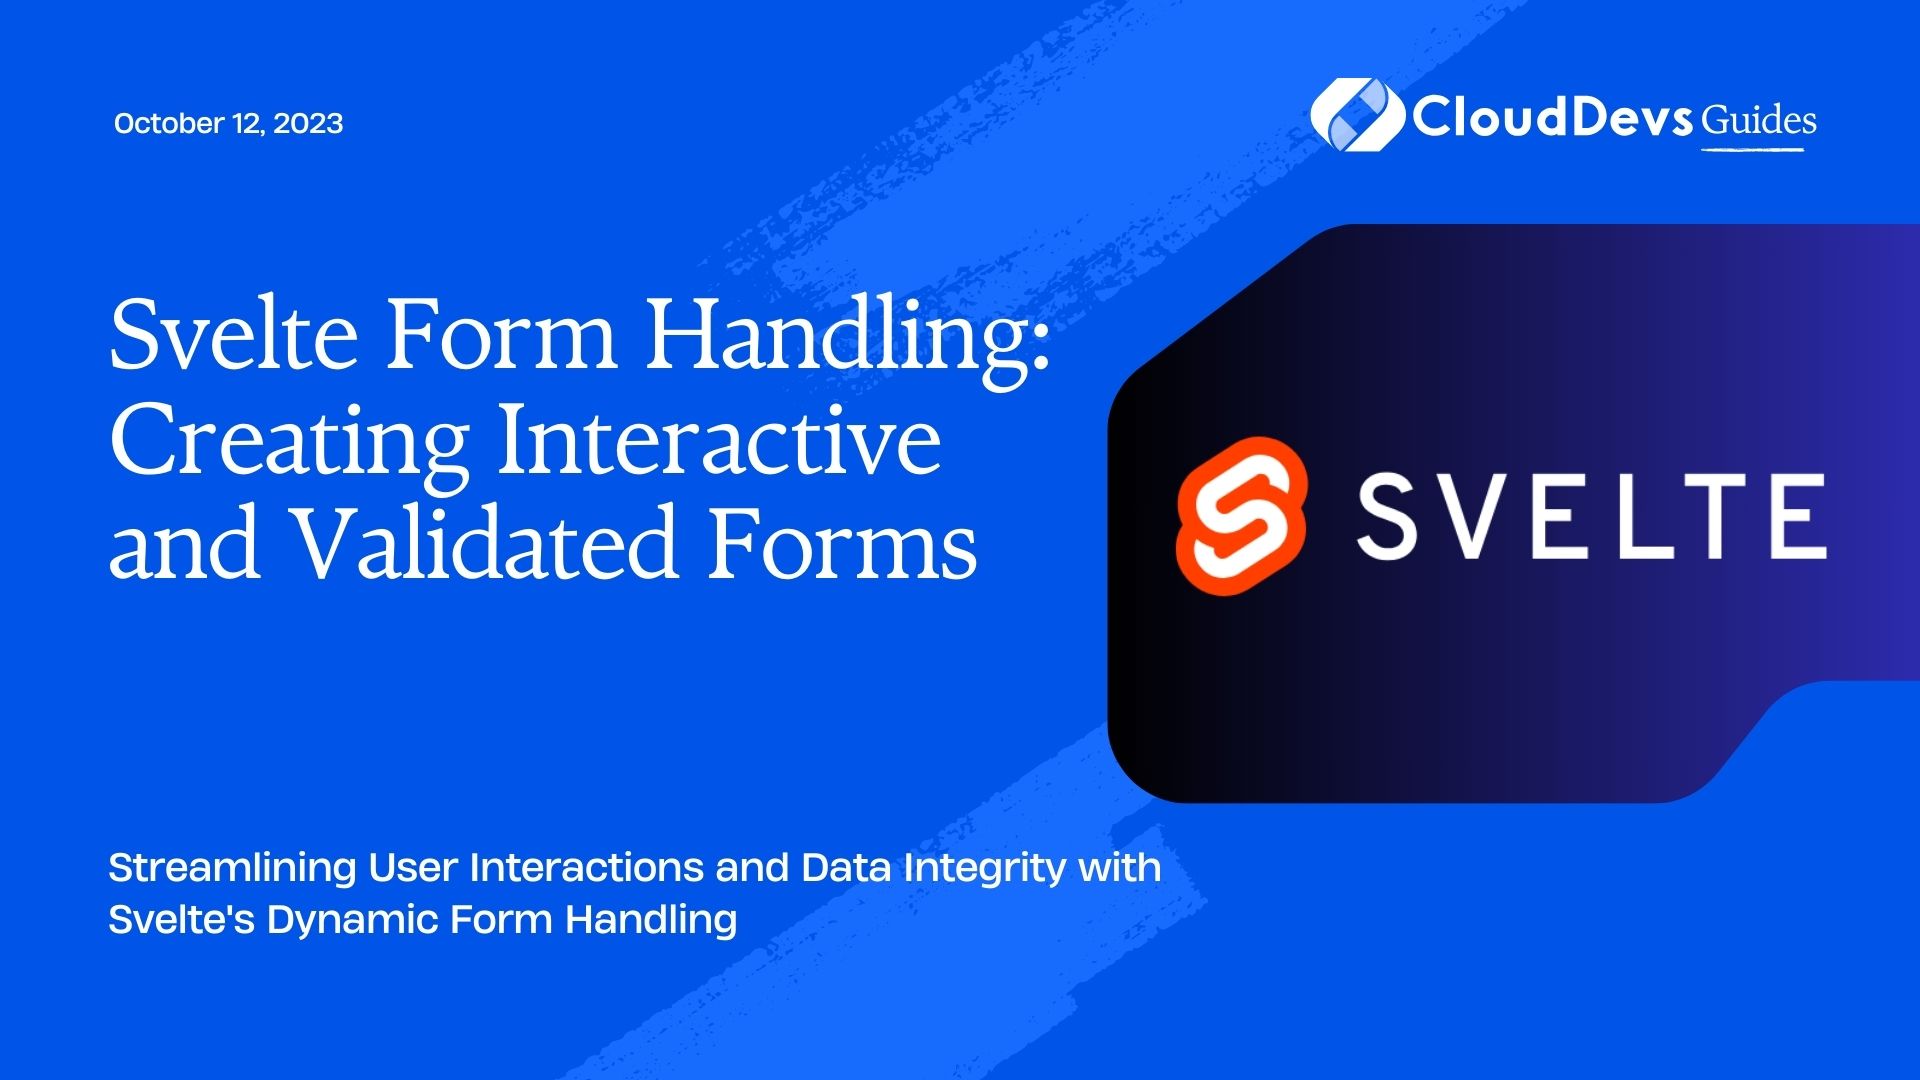 Svelte Form Handling: Creating Interactive and Validated Forms